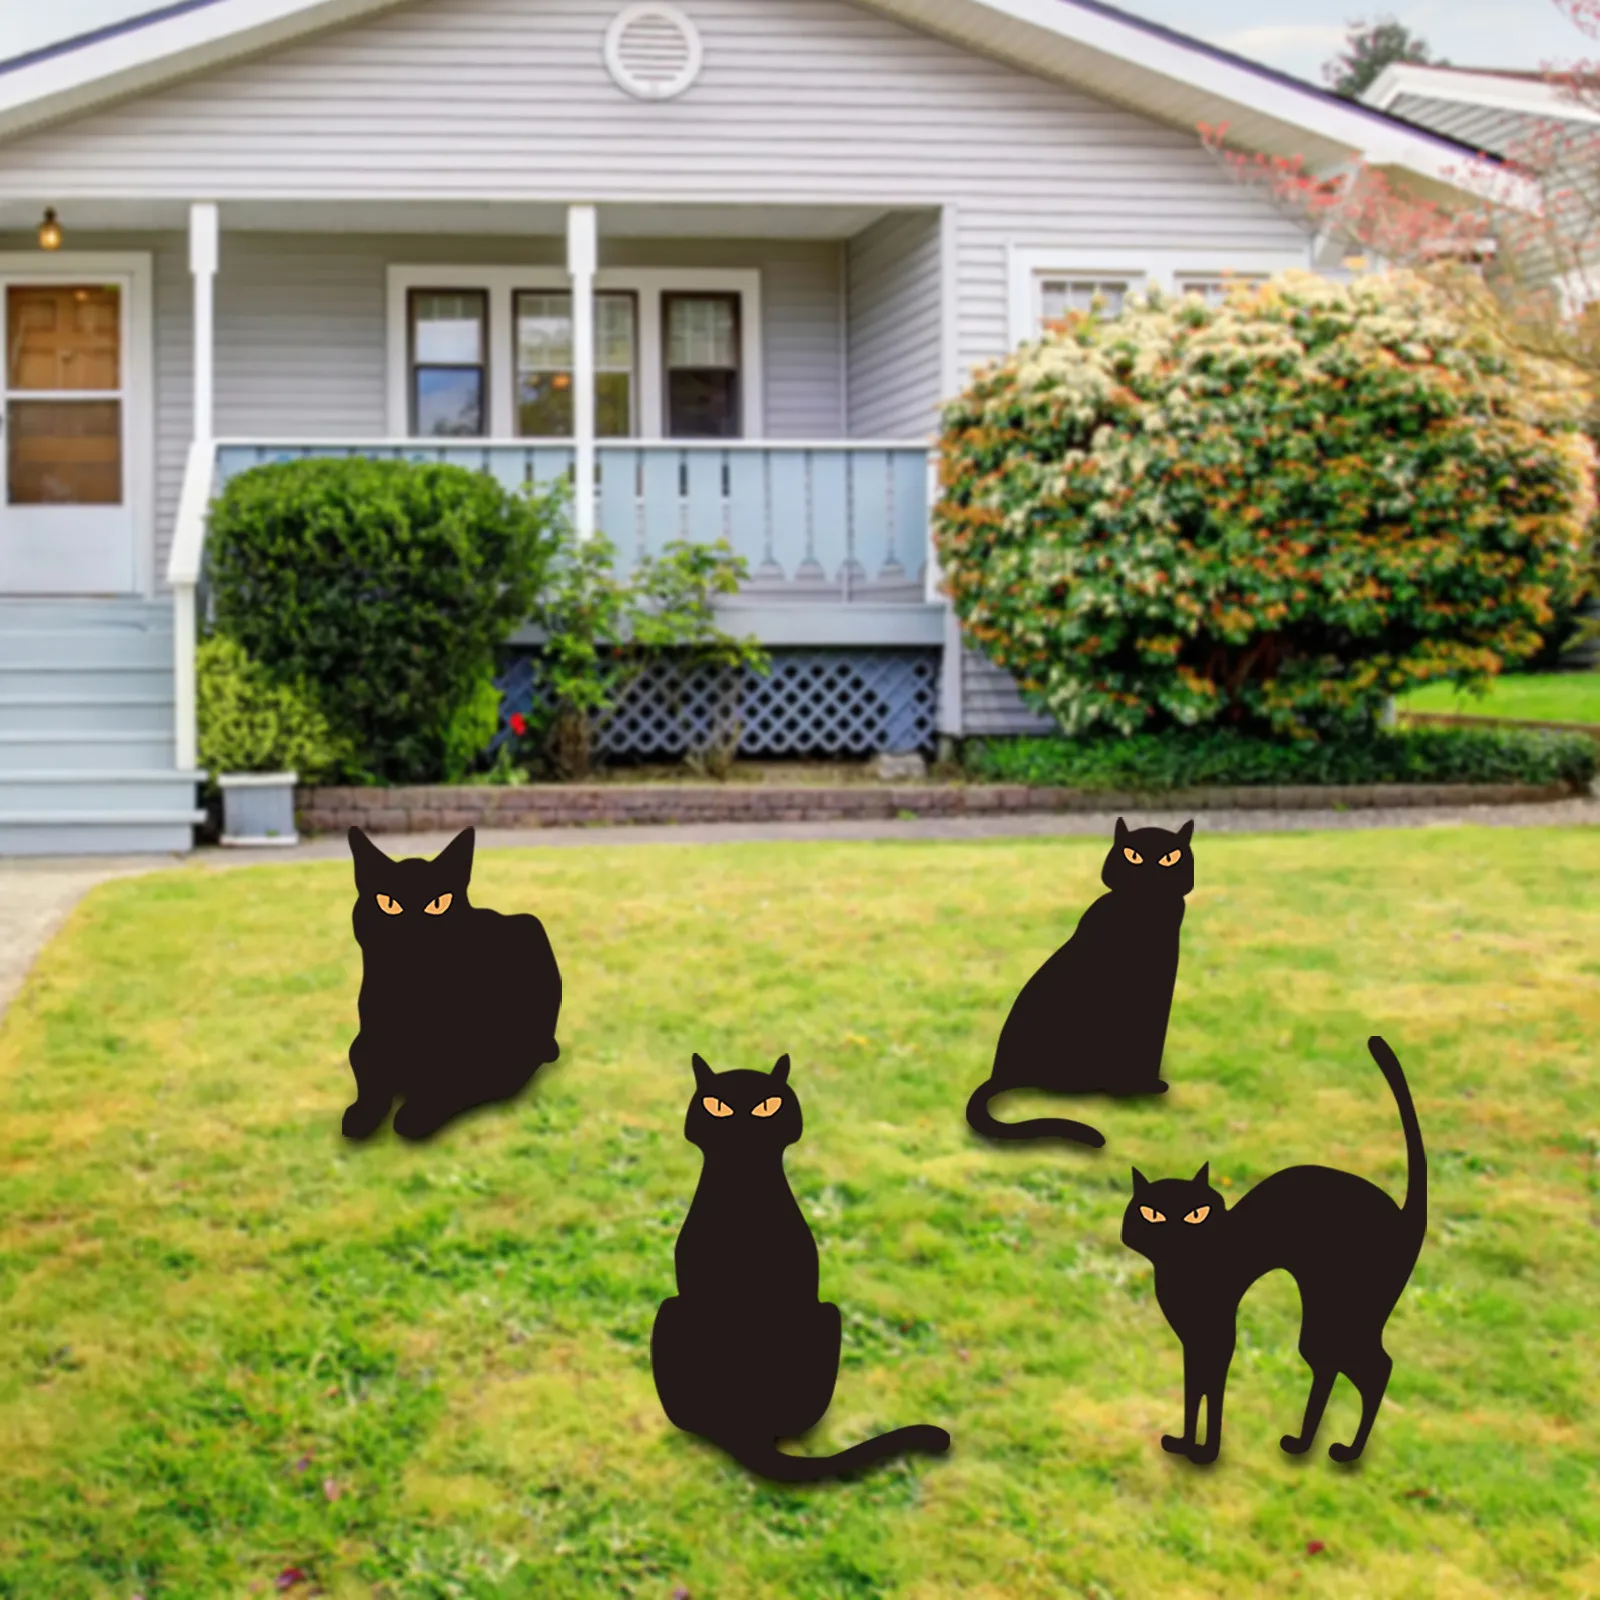 6 Pieces Garden Scare Cats with Reflective Eyes Black Silhouette Cat Yard Sign with Stake Animal Stake Decorative Garden Stake Halloween Decoration Outdoor for Garden Yard Backyard Lawn Decoration 